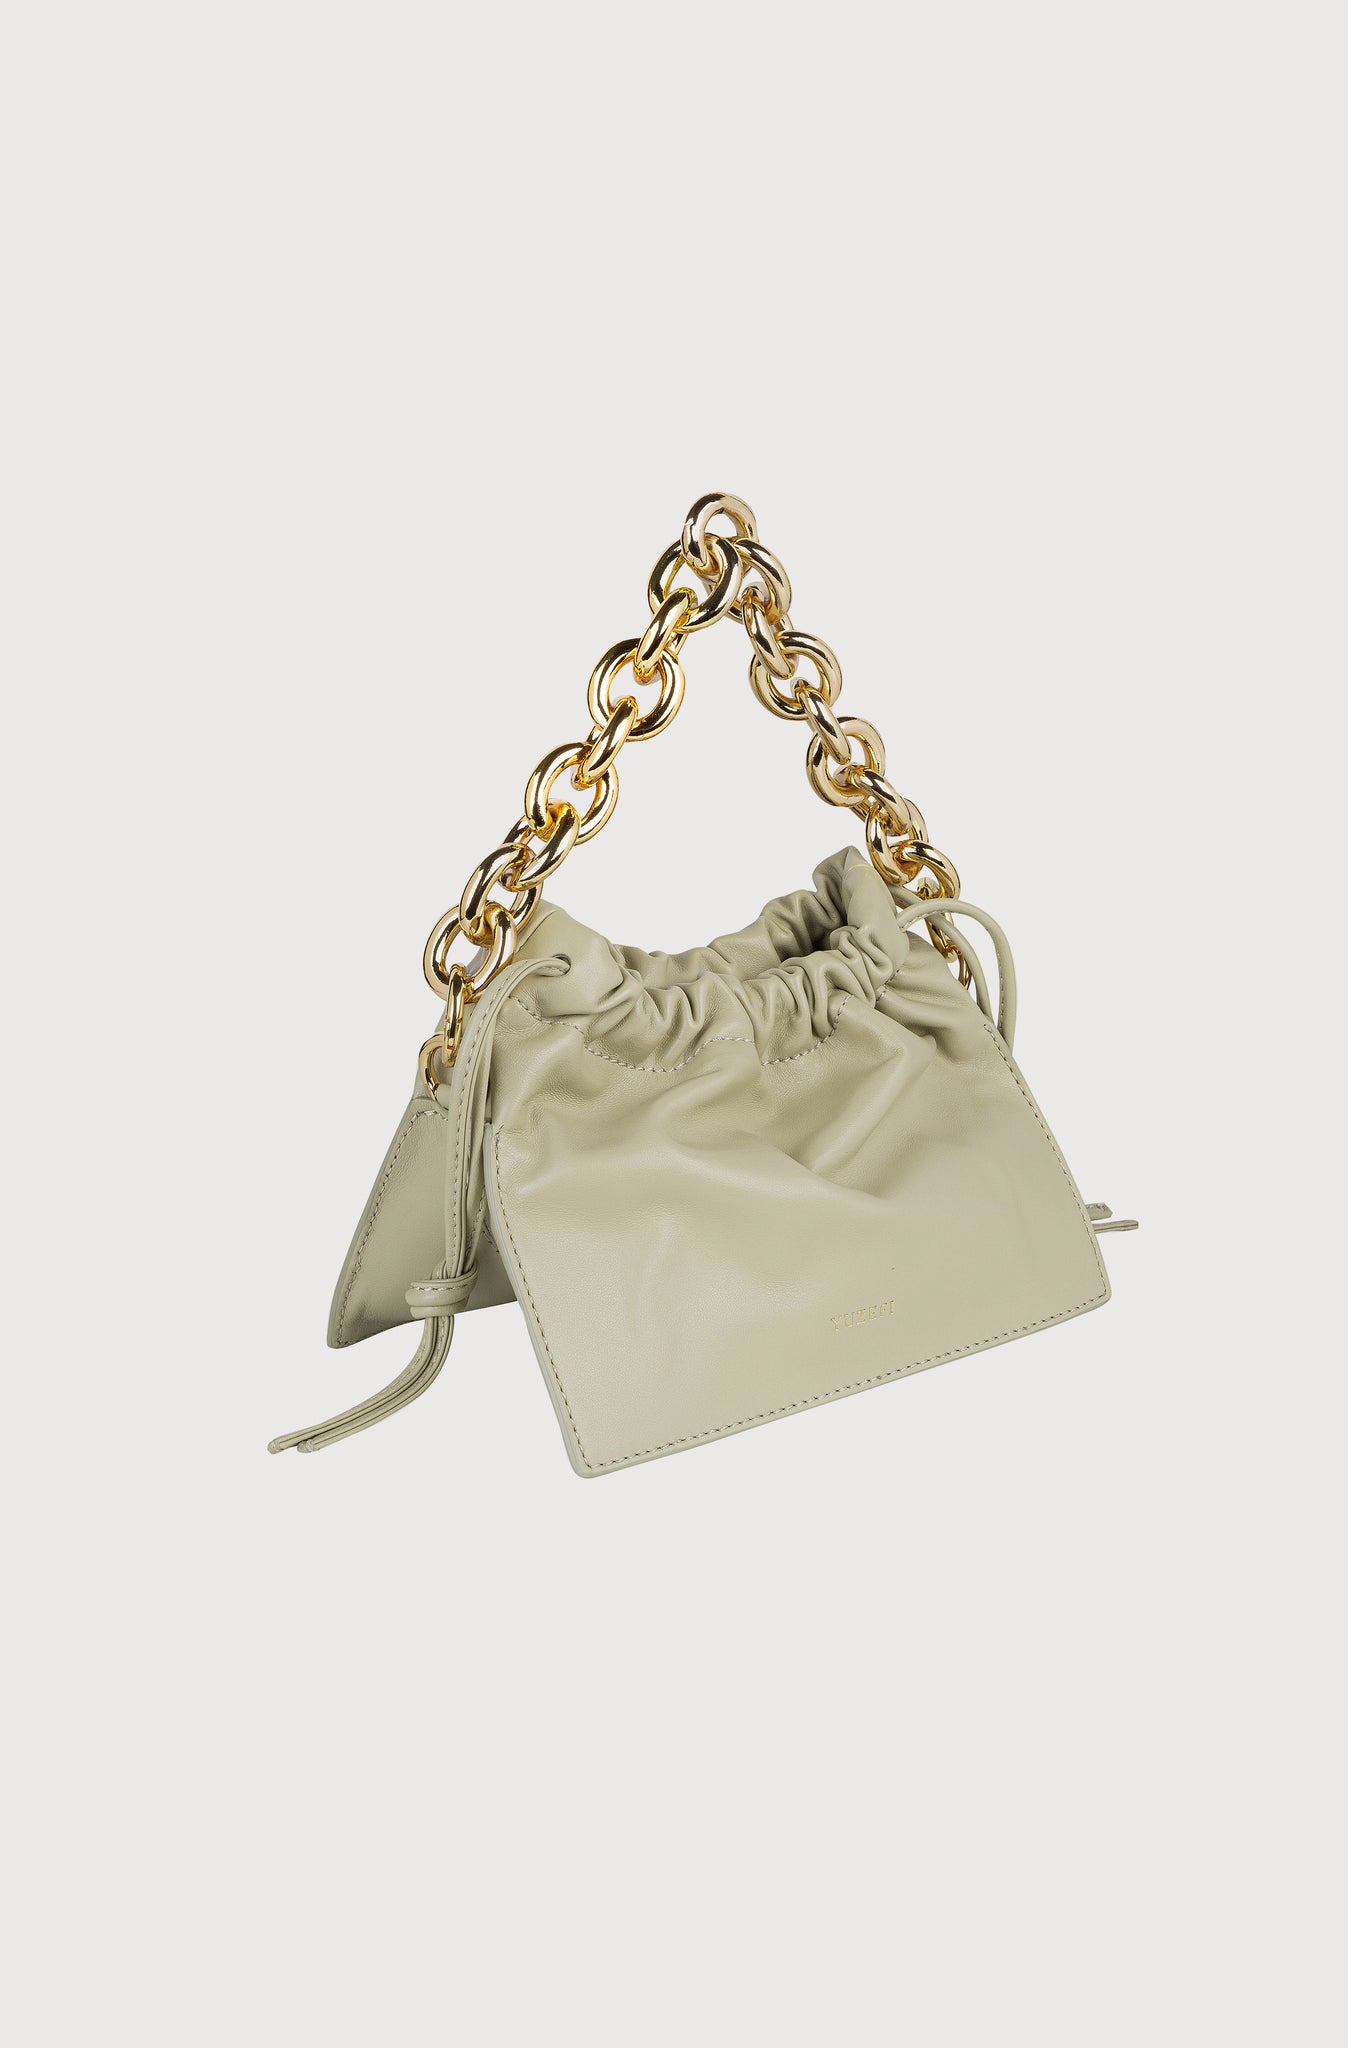 MINI BOM - OLIVE WITH GOLD CHAIN